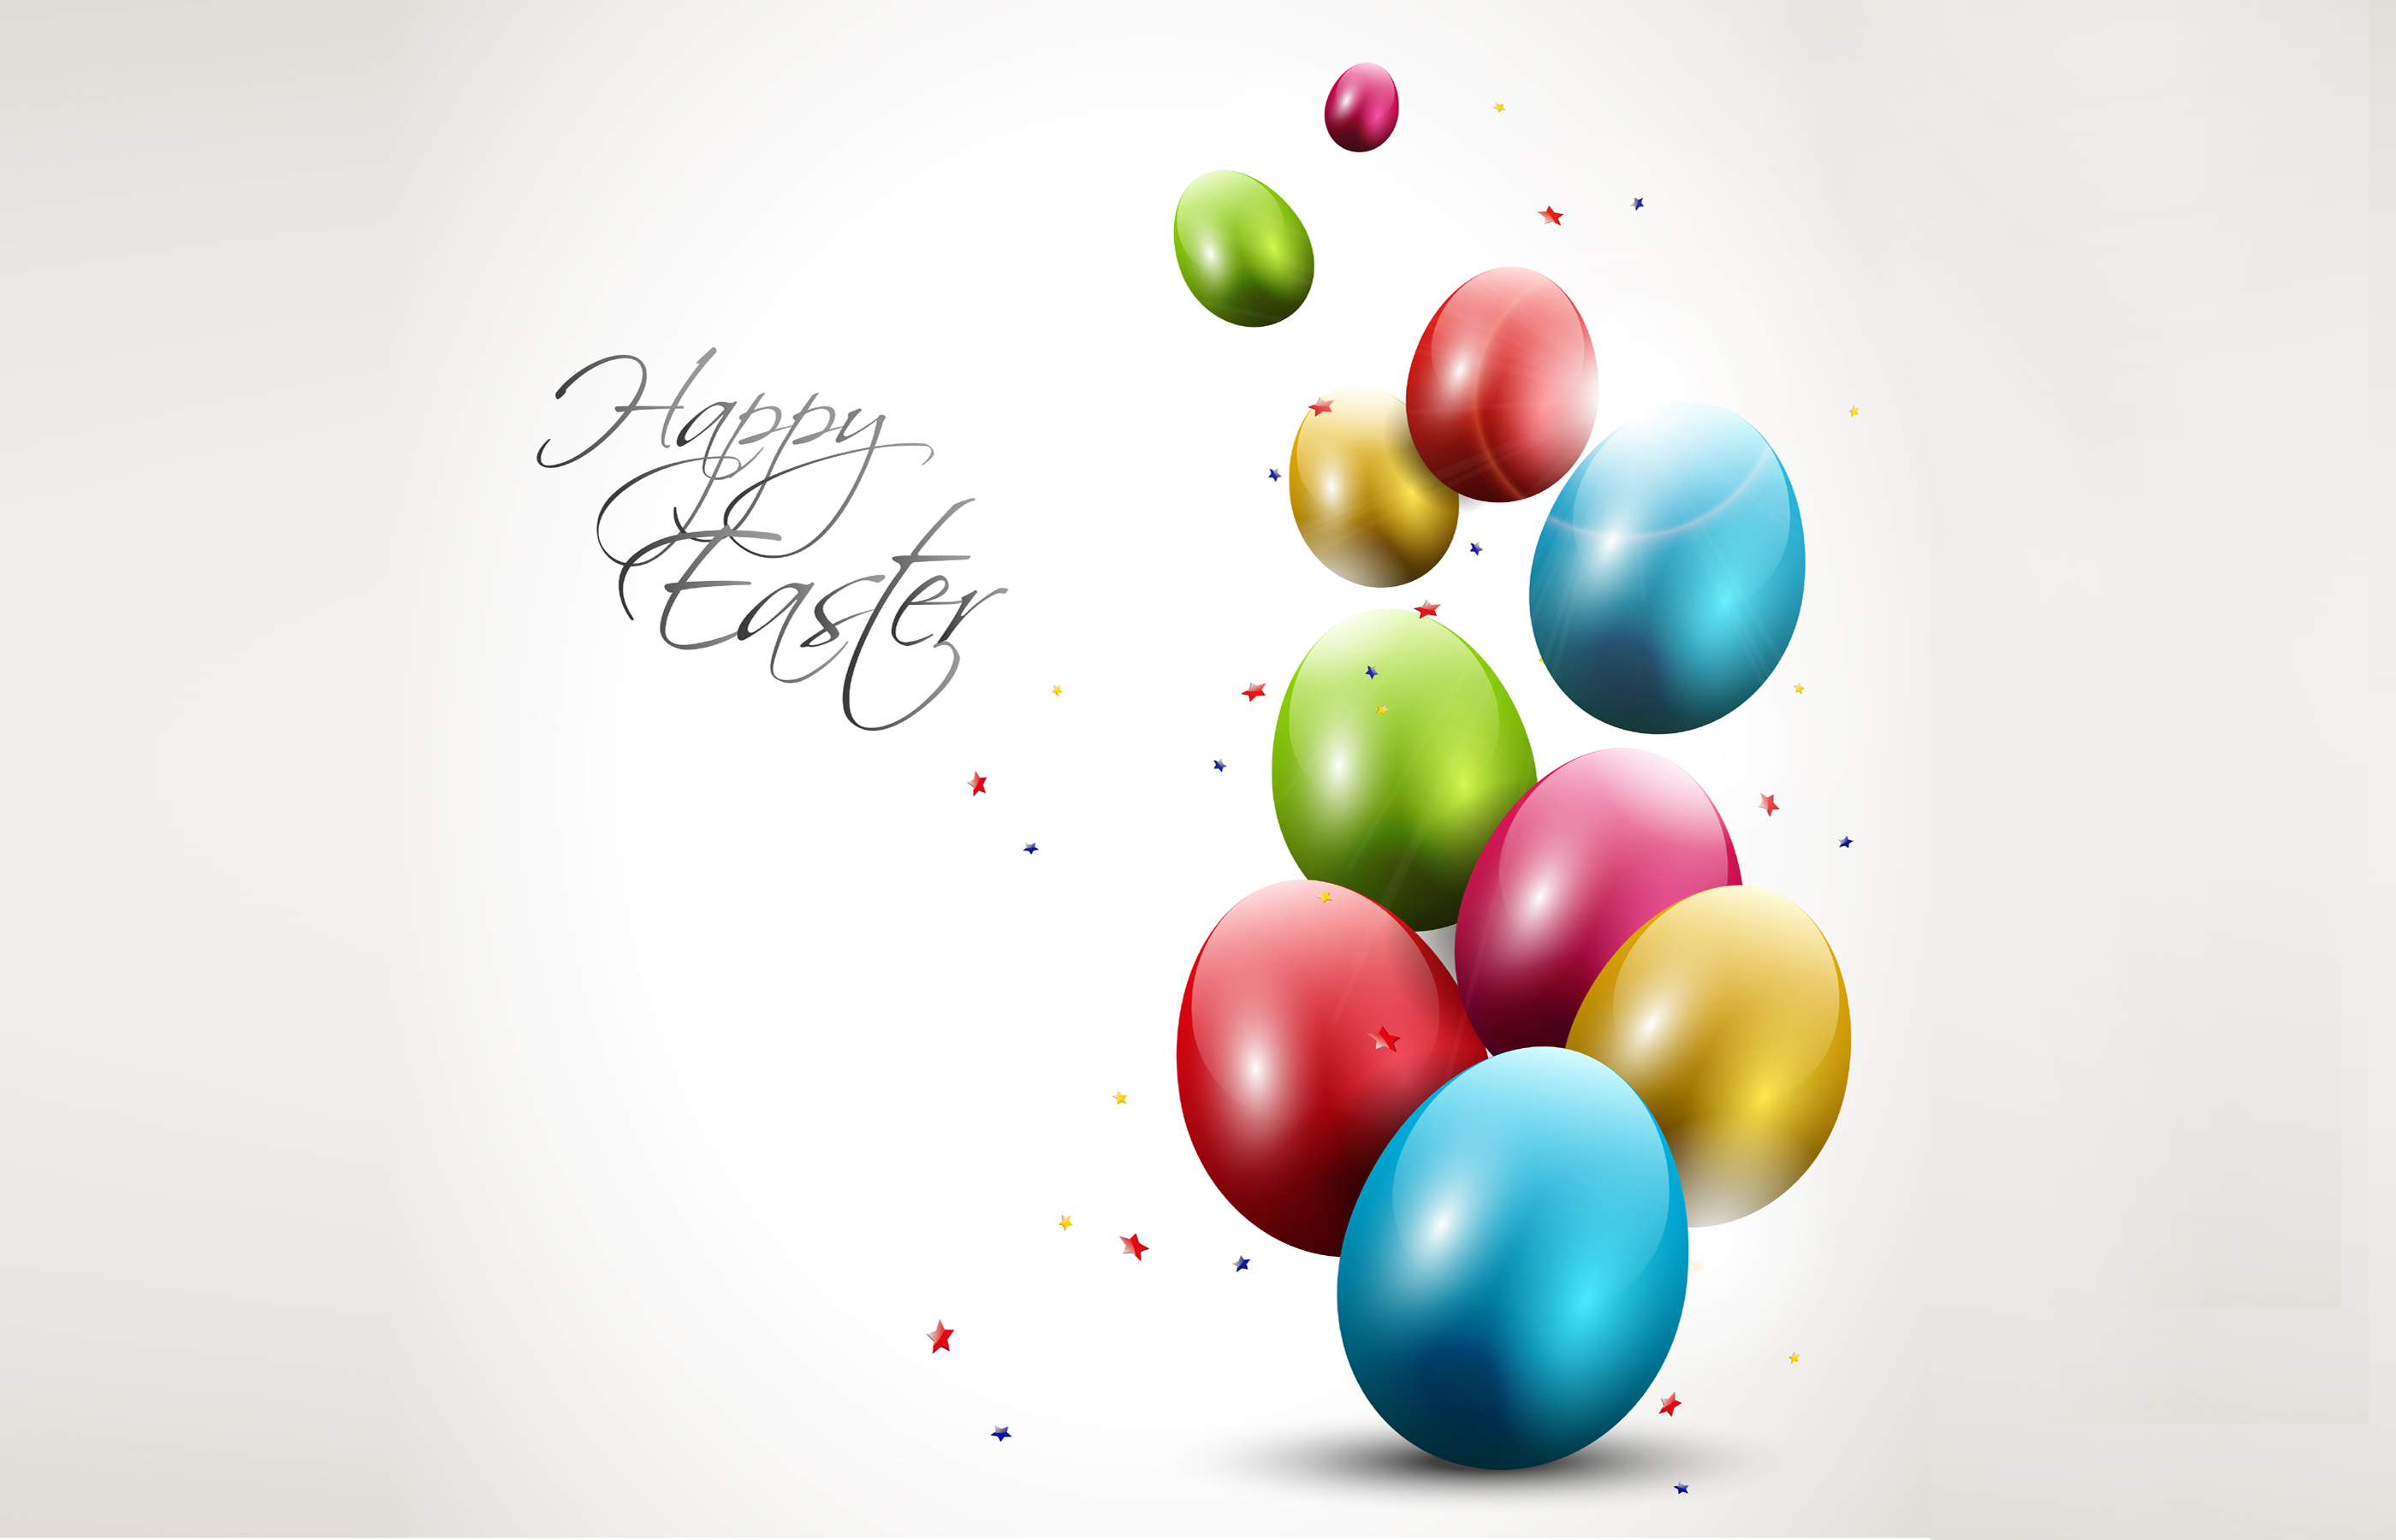 Happy Easter 2017 Images - Free Easter Images Download - HD Wallpaper 